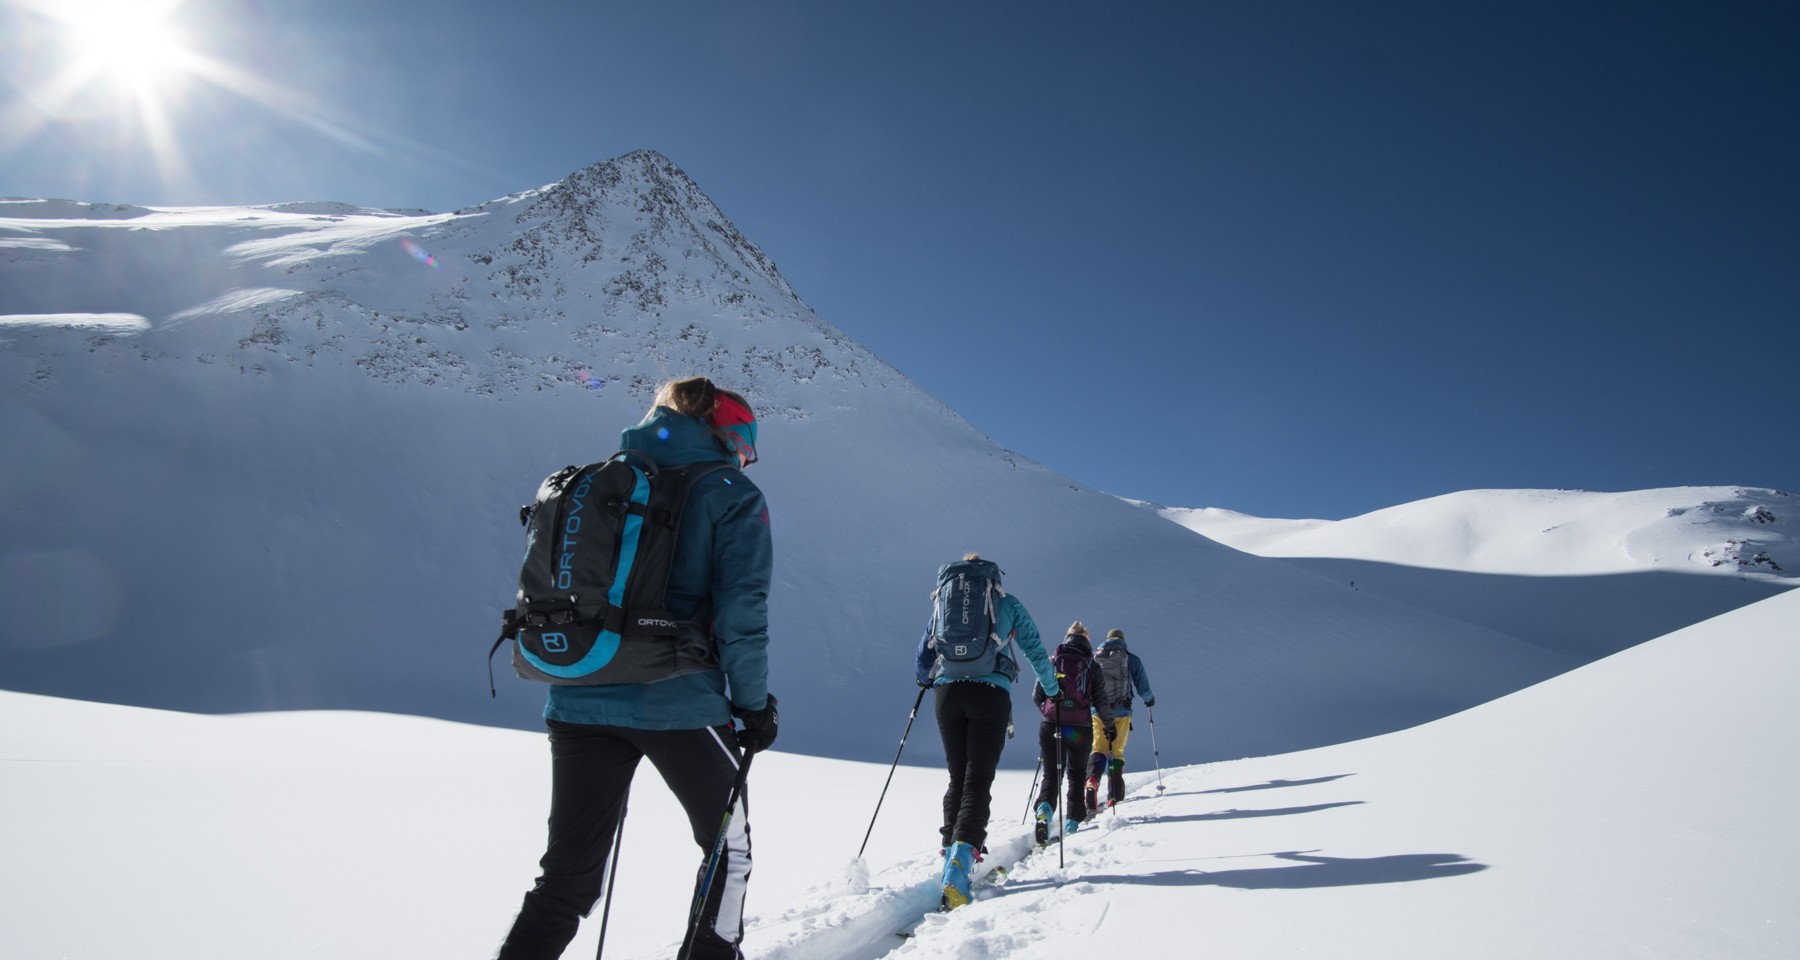 Ski Touring course for the advanced